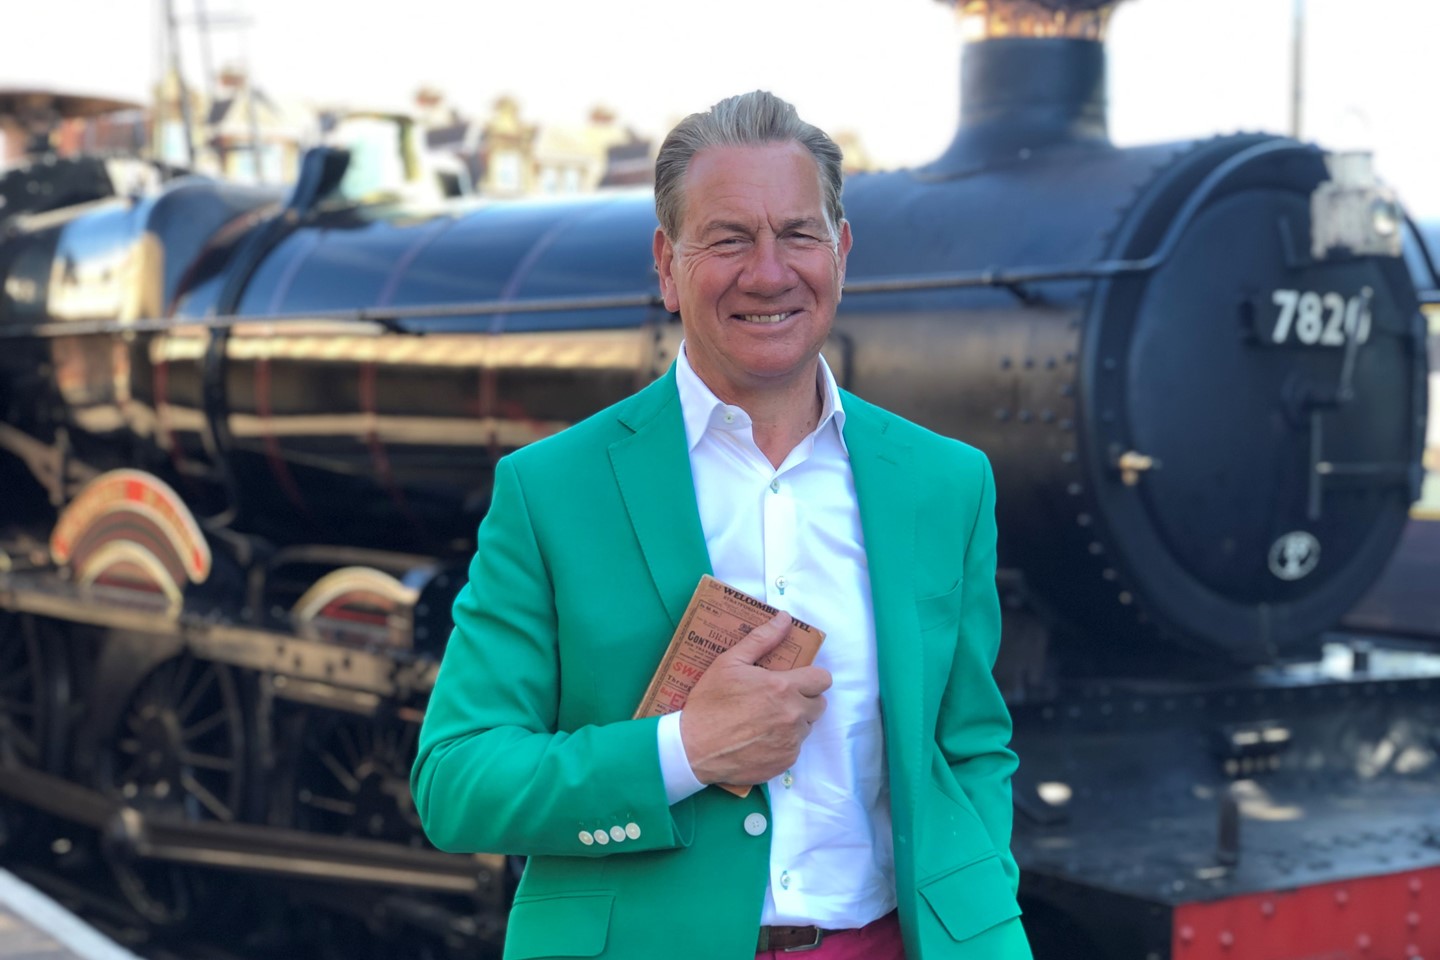 Michael Portillo in front of a steam engine